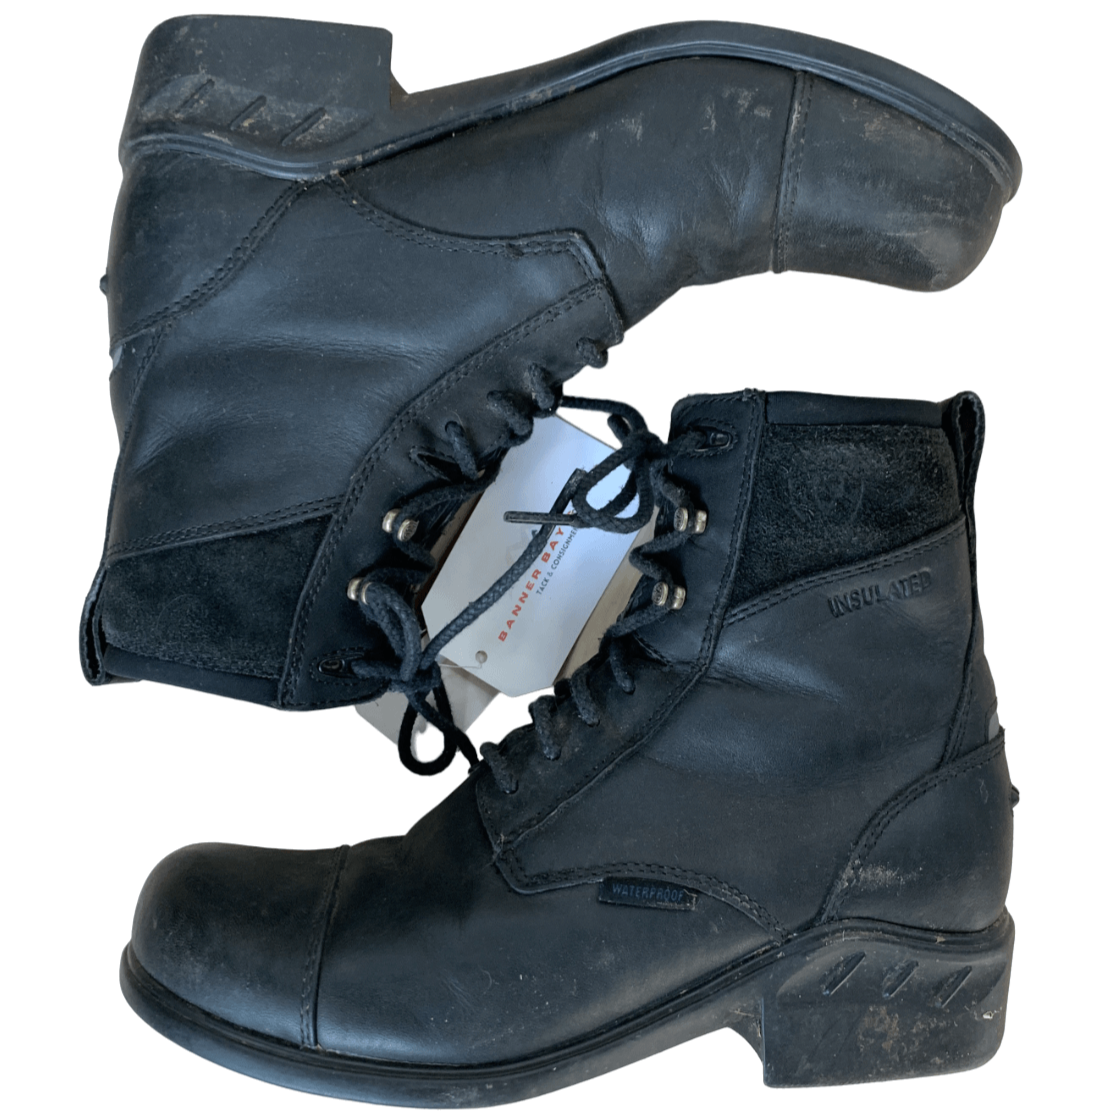 Ariat 'Extreme' Laced H20 Insulated Paddock Boots